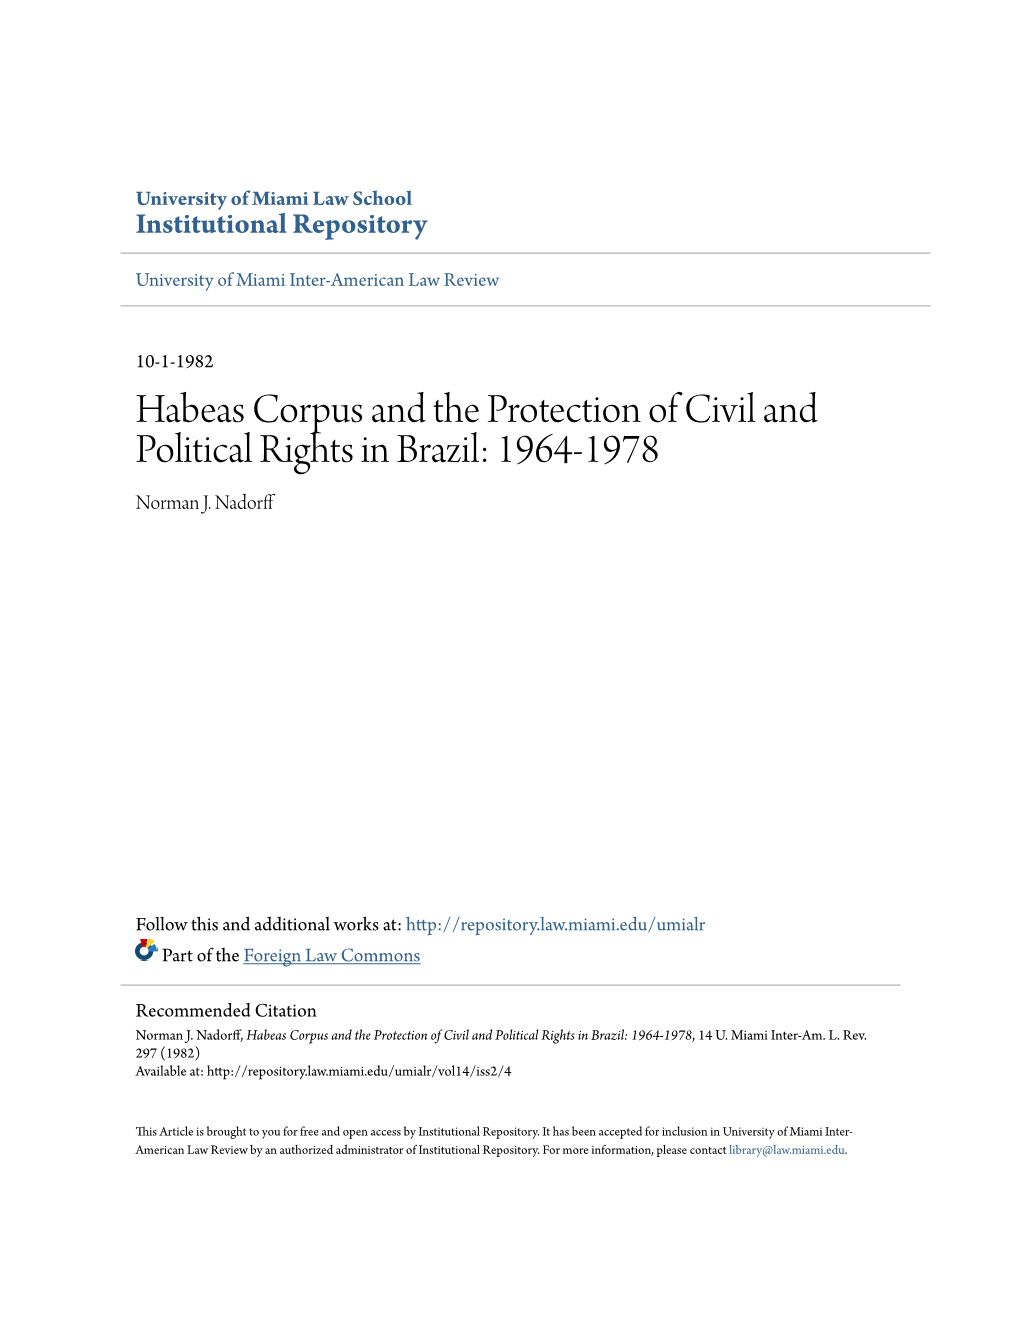 Habeas Corpus and the Protection of Civil and Political Rights in Brazil: 1964-1978 Norman J